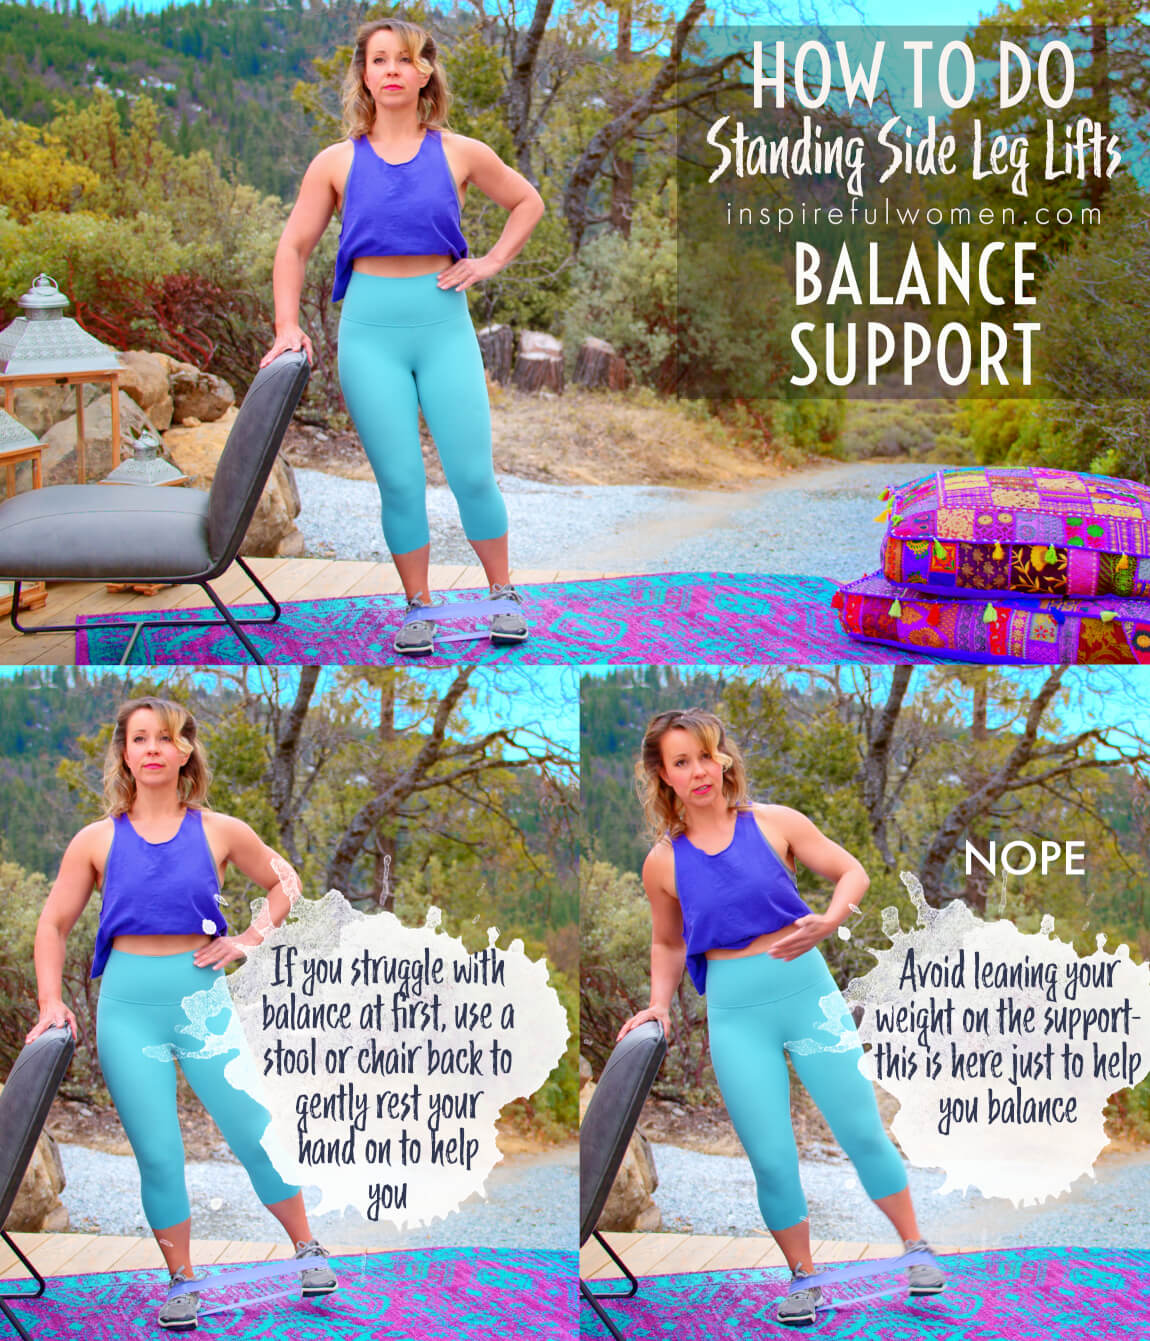 how-to-standing-side-leg-raises-balance-support-glutes-exercise-at-home-women-over-40